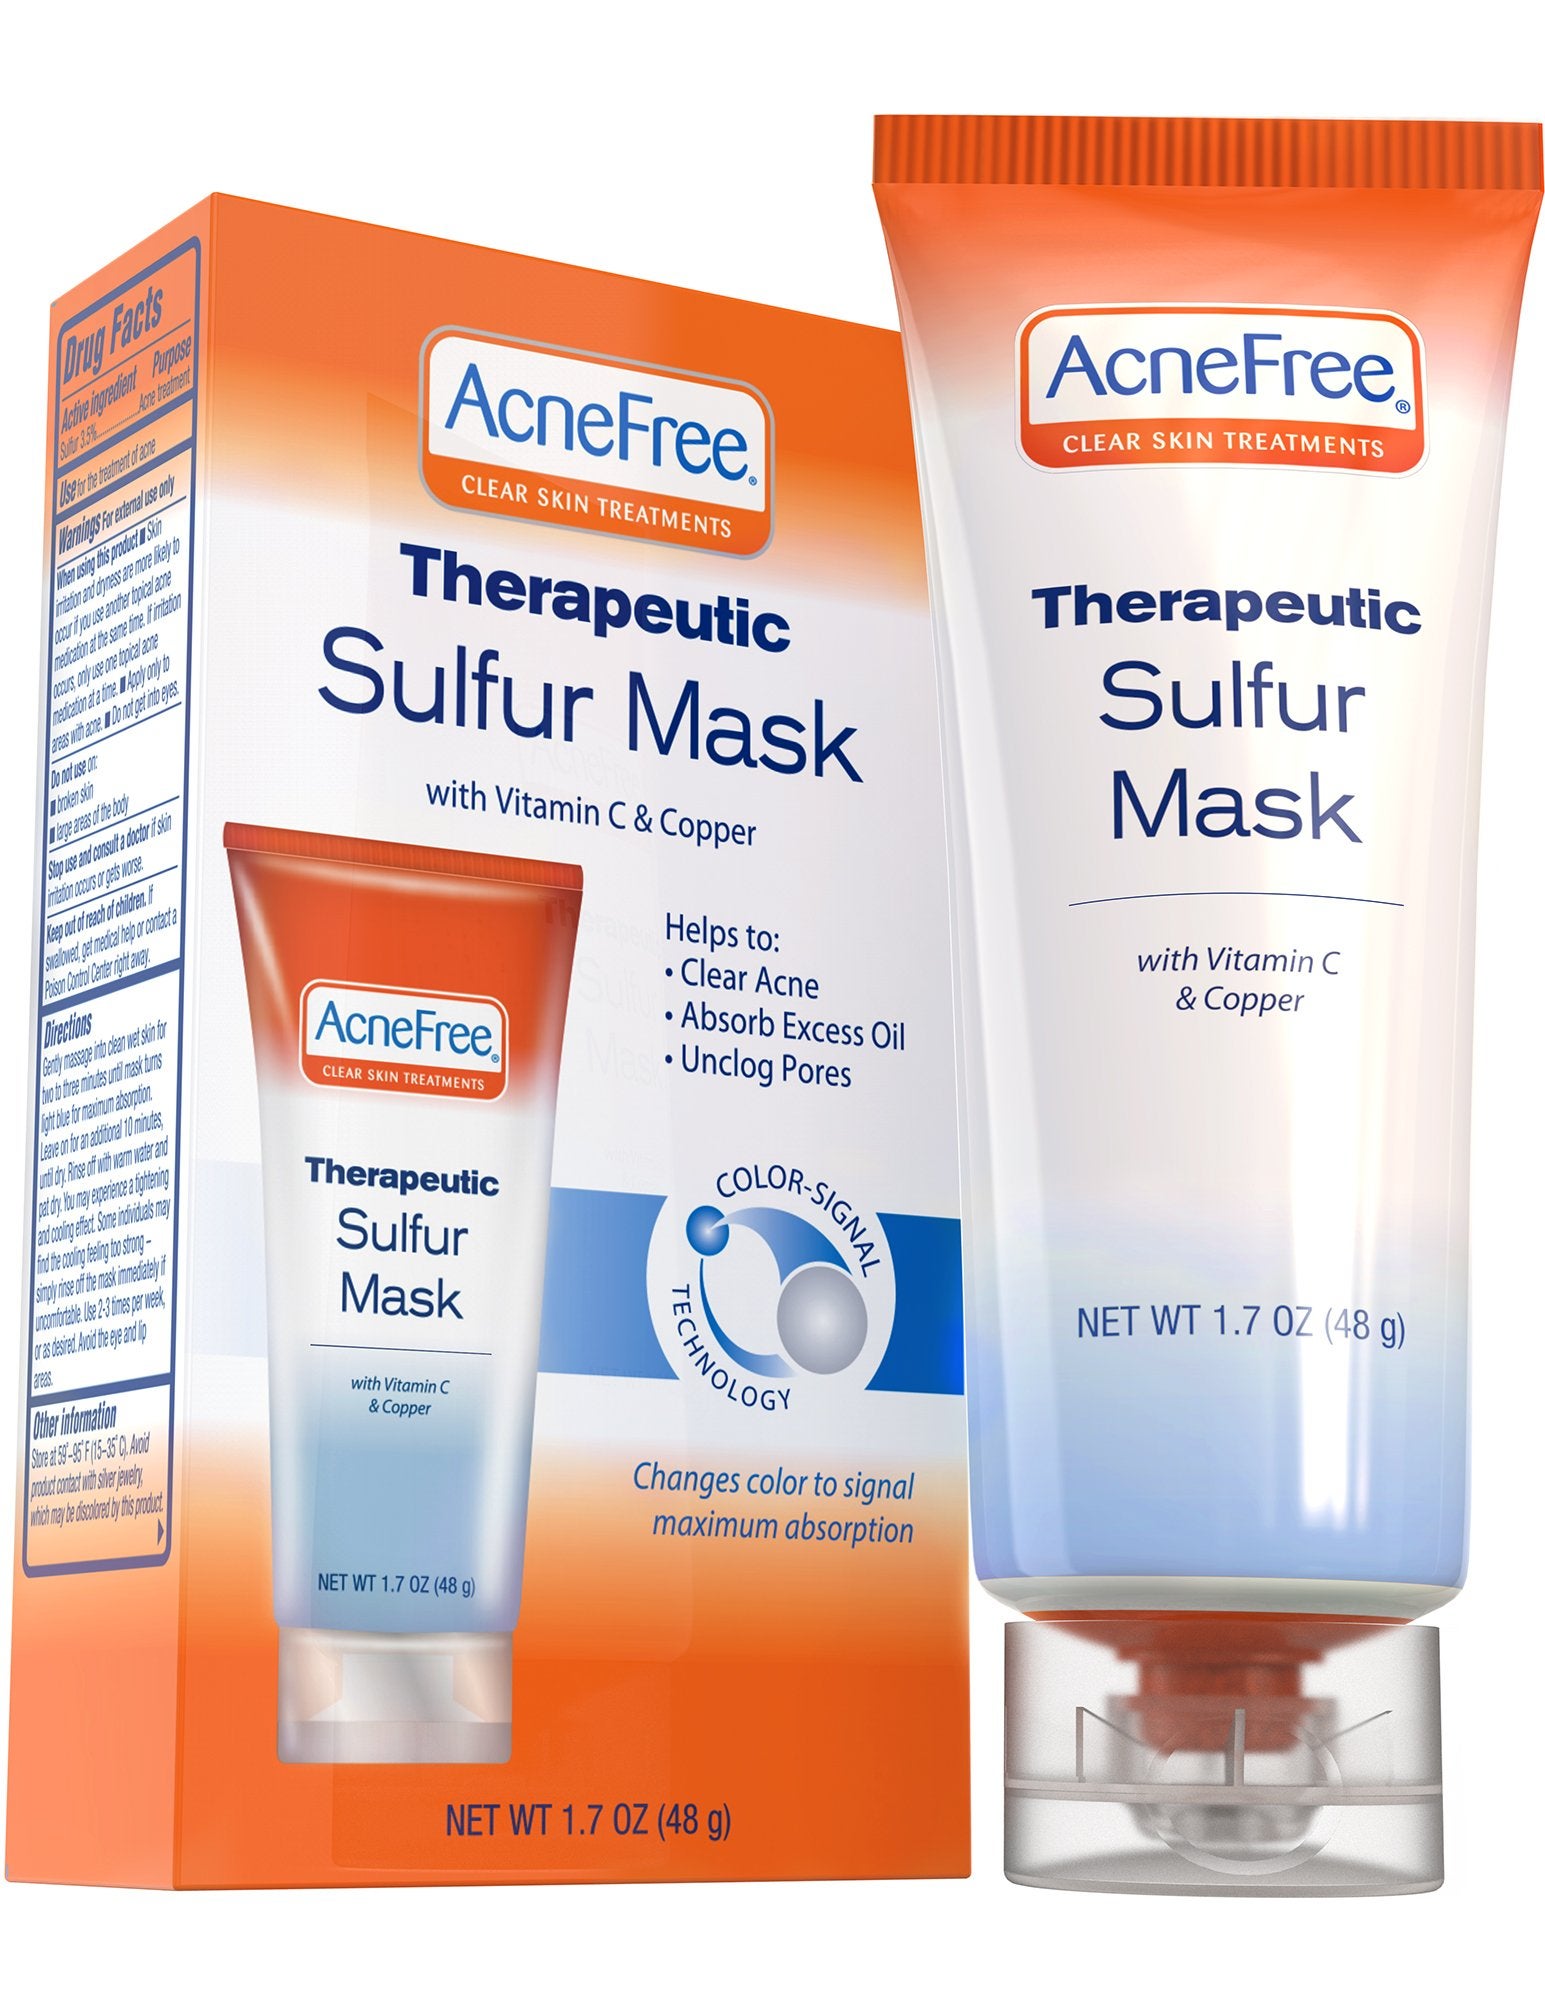 AcneFree + Mask